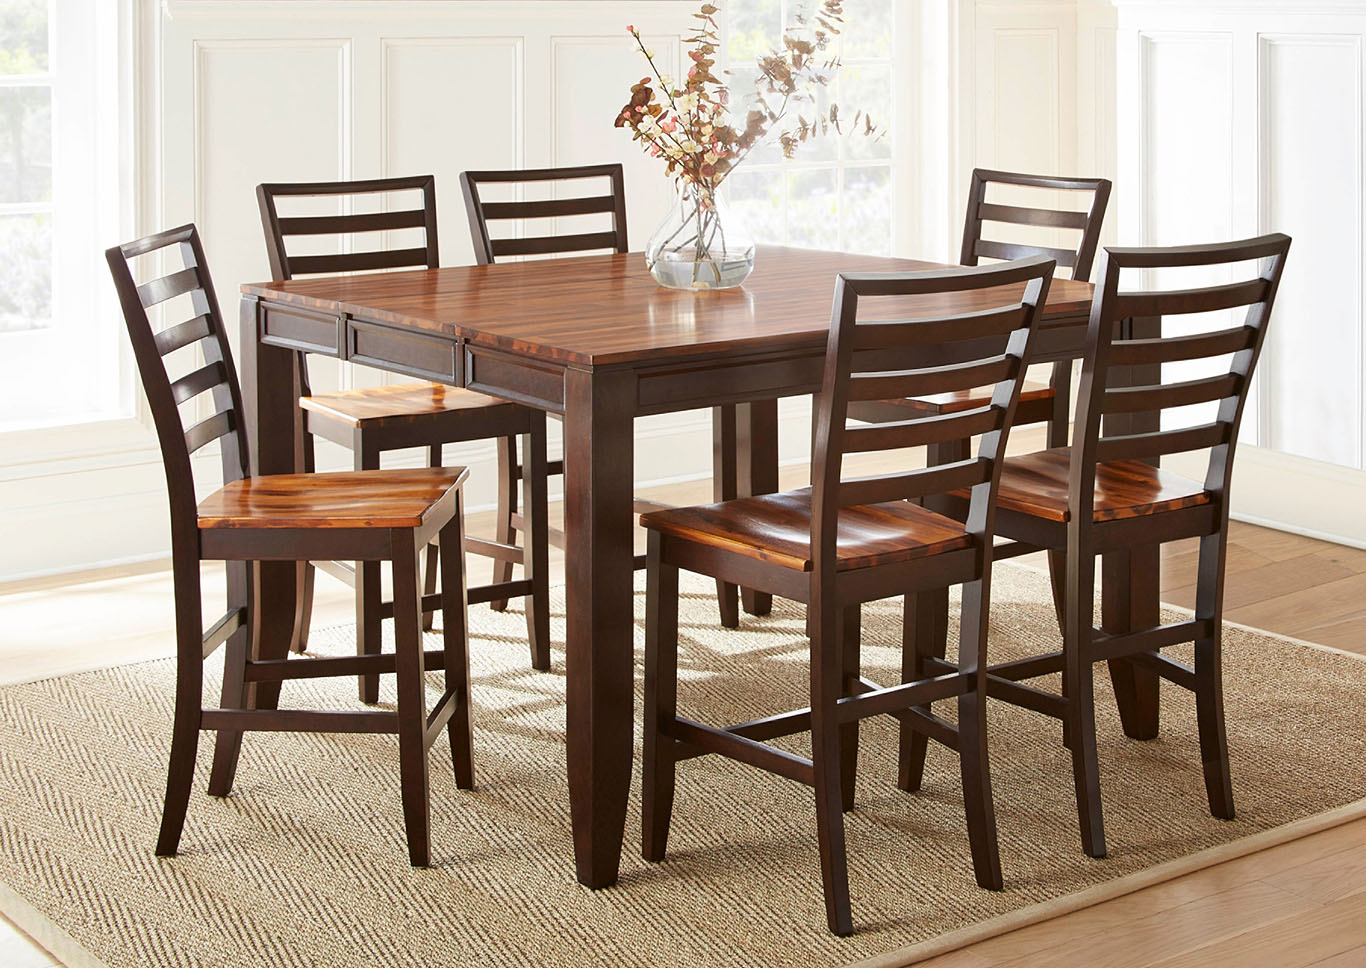 Abaco Brown Rectangular Dining Set W 6, Bar Height Dining Table And 6 Chairs